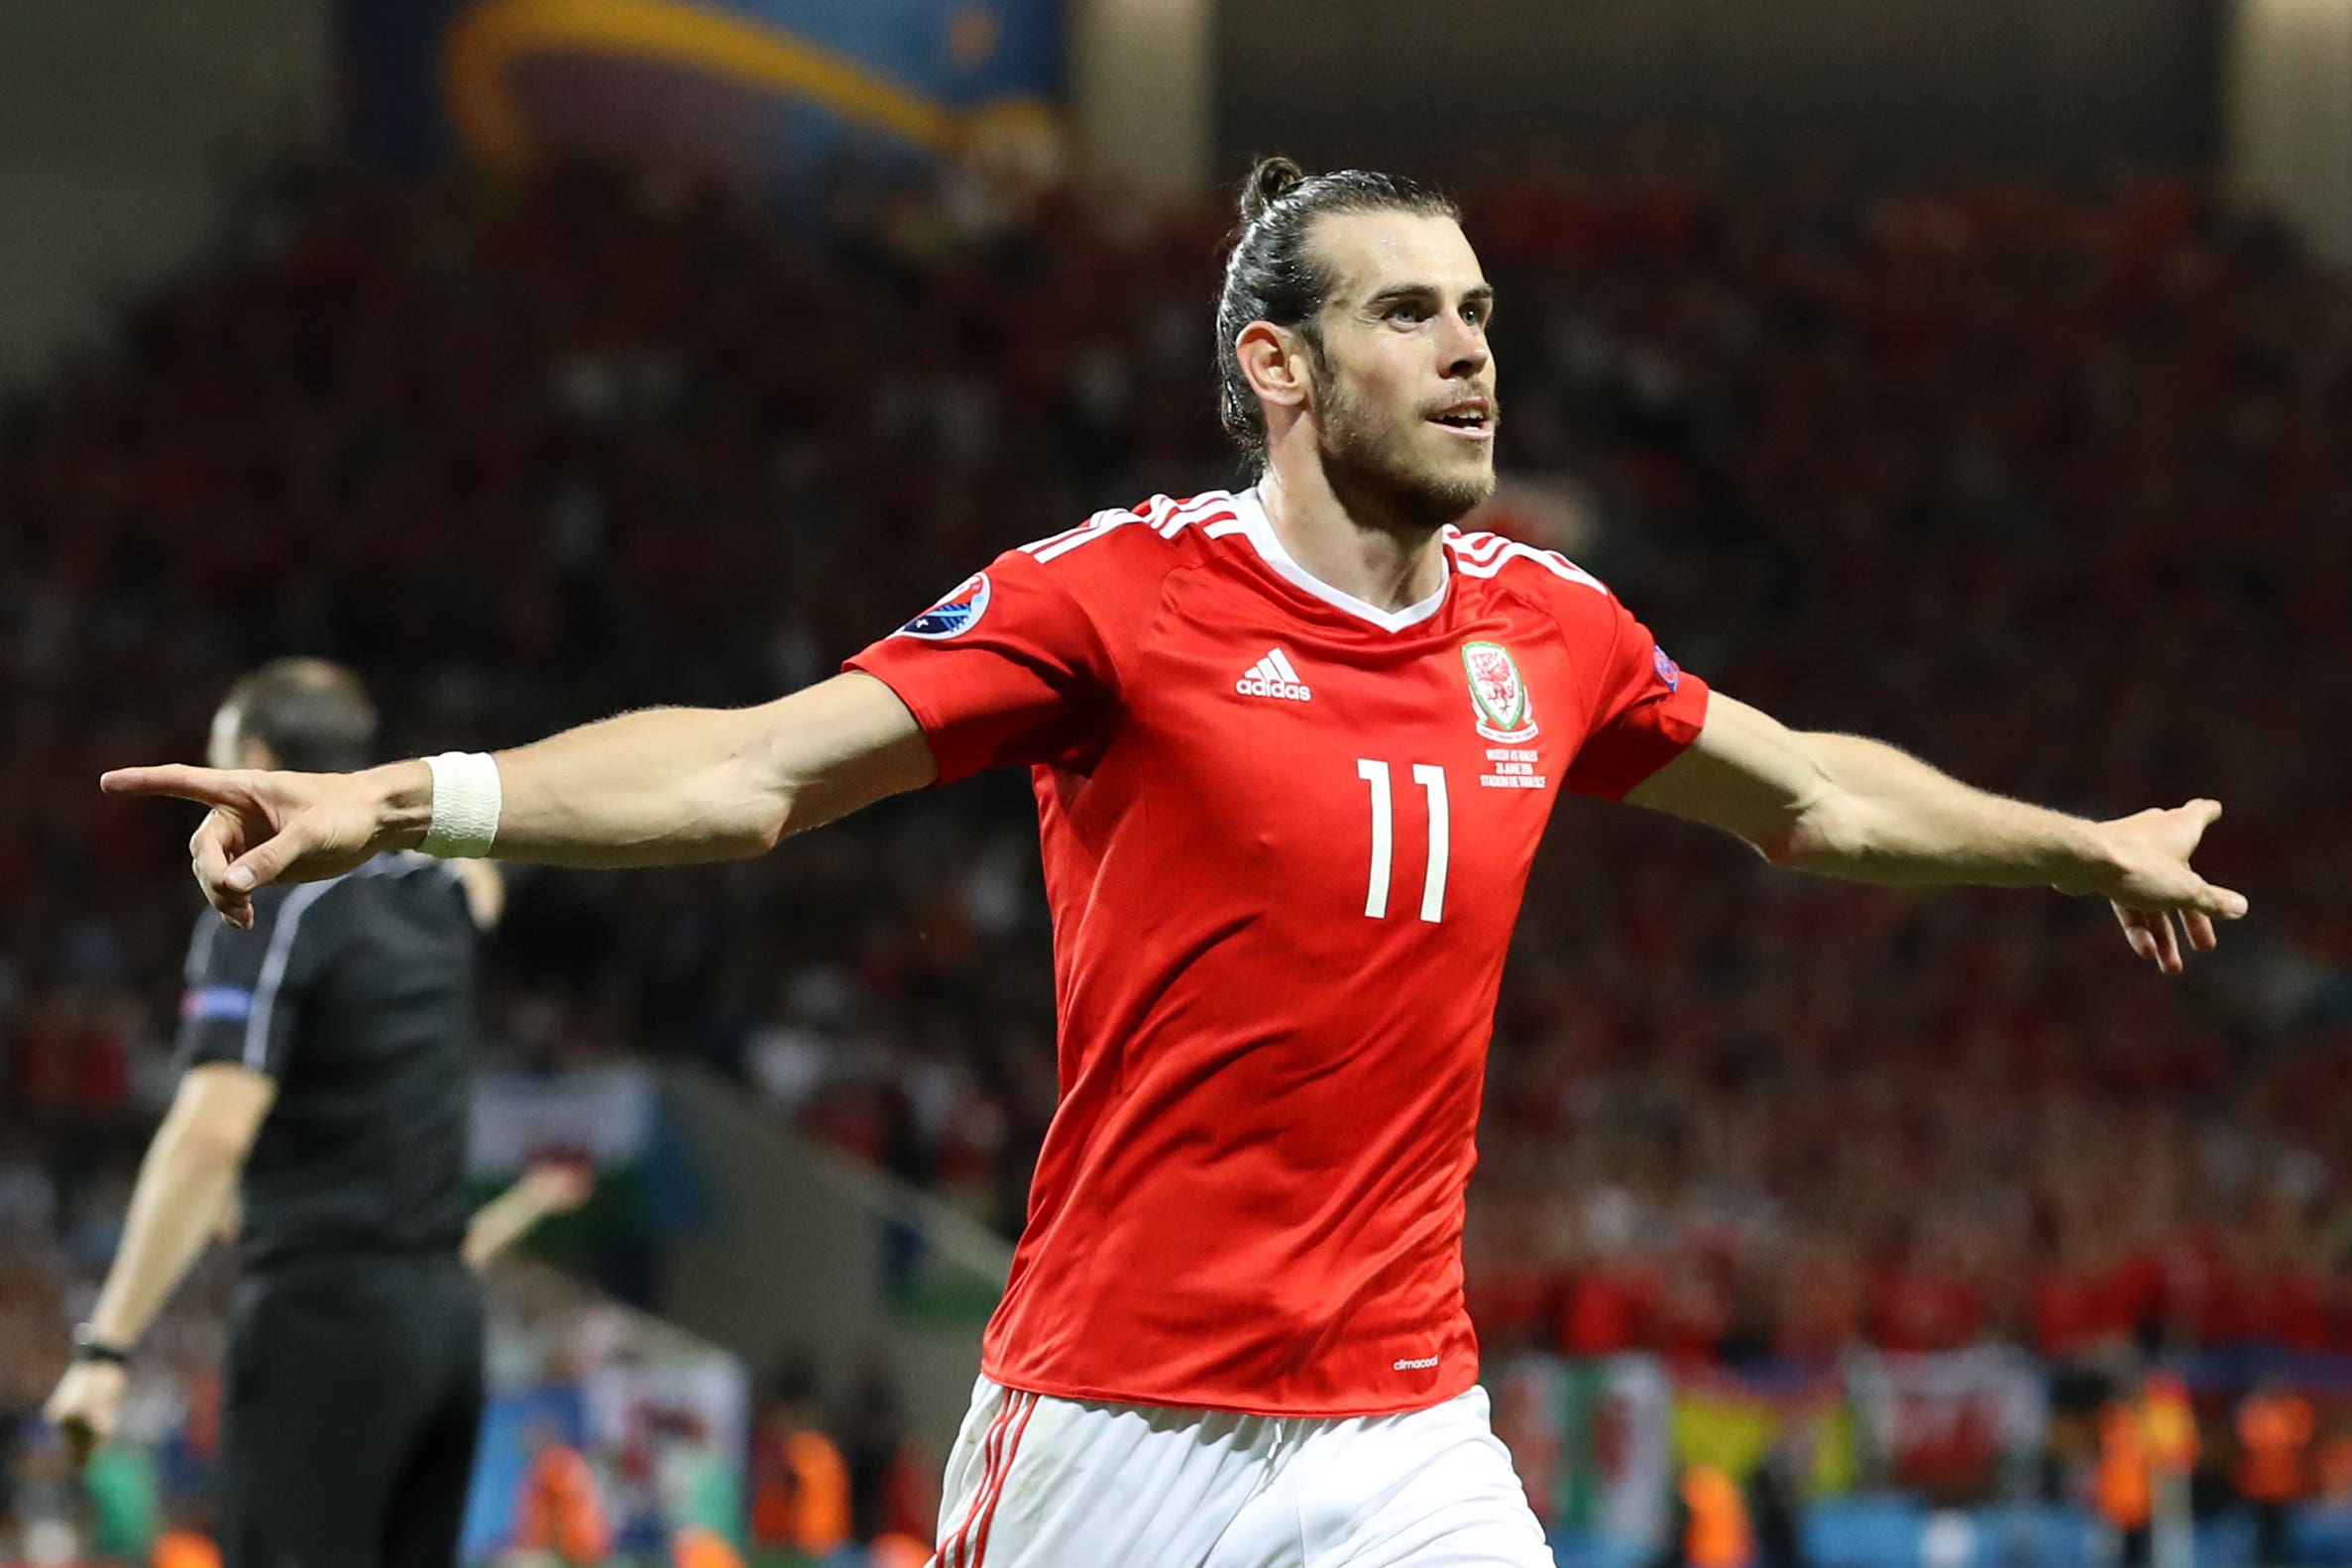 Gareth Bale 'set to retire from club football' but could still